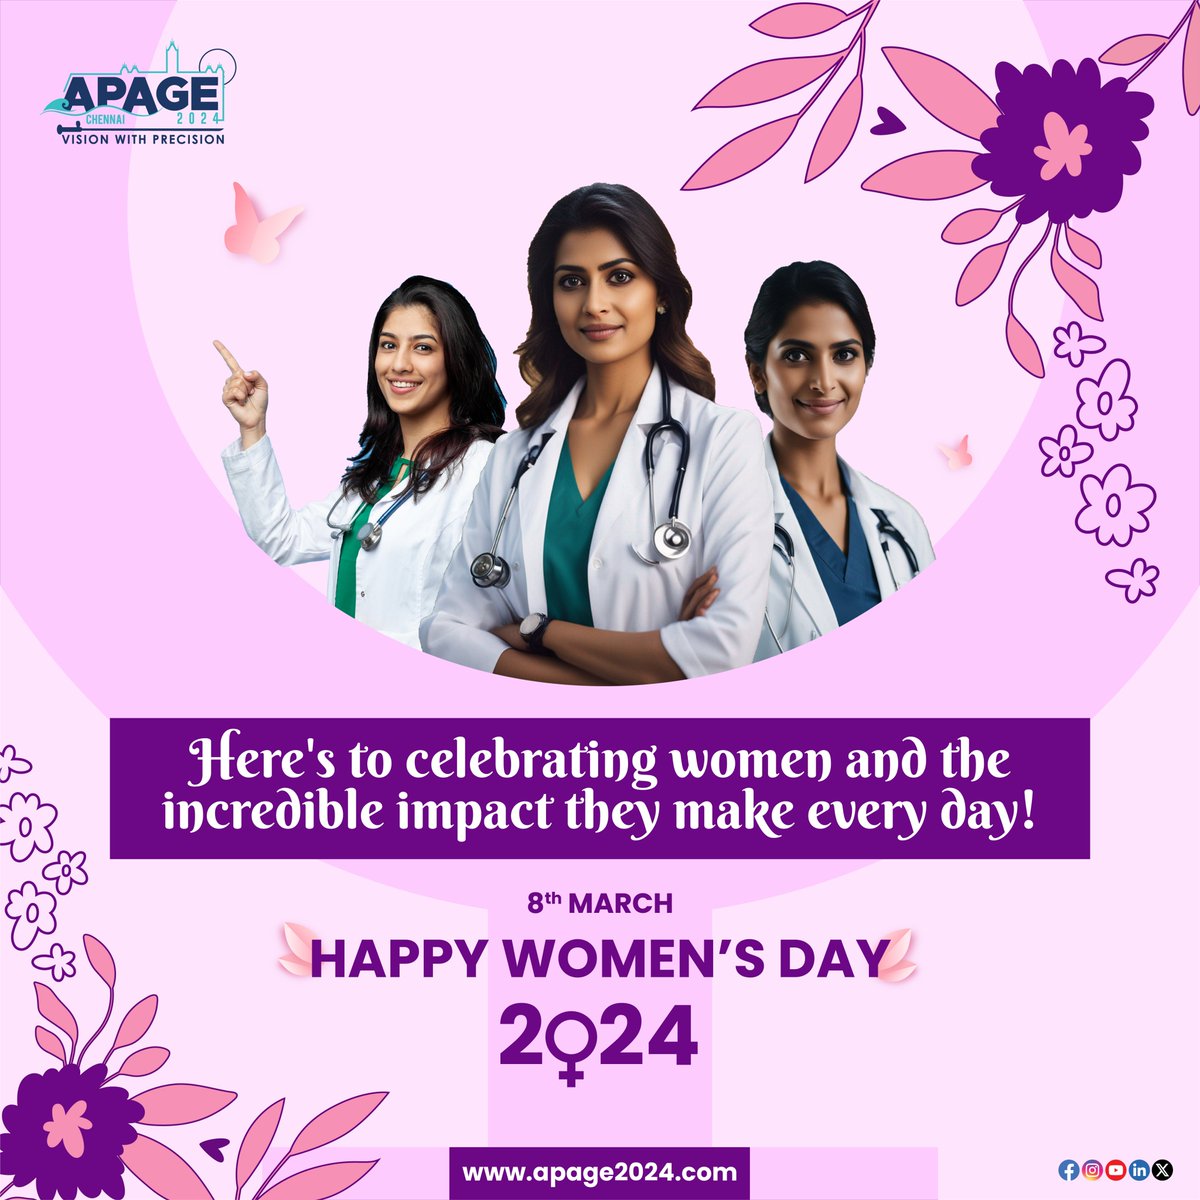 Empowering Women in White Coats: Celebrating the Healing Hands and Brilliant Minds of our Doctor Queens on International Women's Day! 💉🌸
#WomenInMedicine #HeForSheInHealthcare #womensday2024

#chennai #medicalstudent #gynocologist #medicalevent #medicalconference #doctors